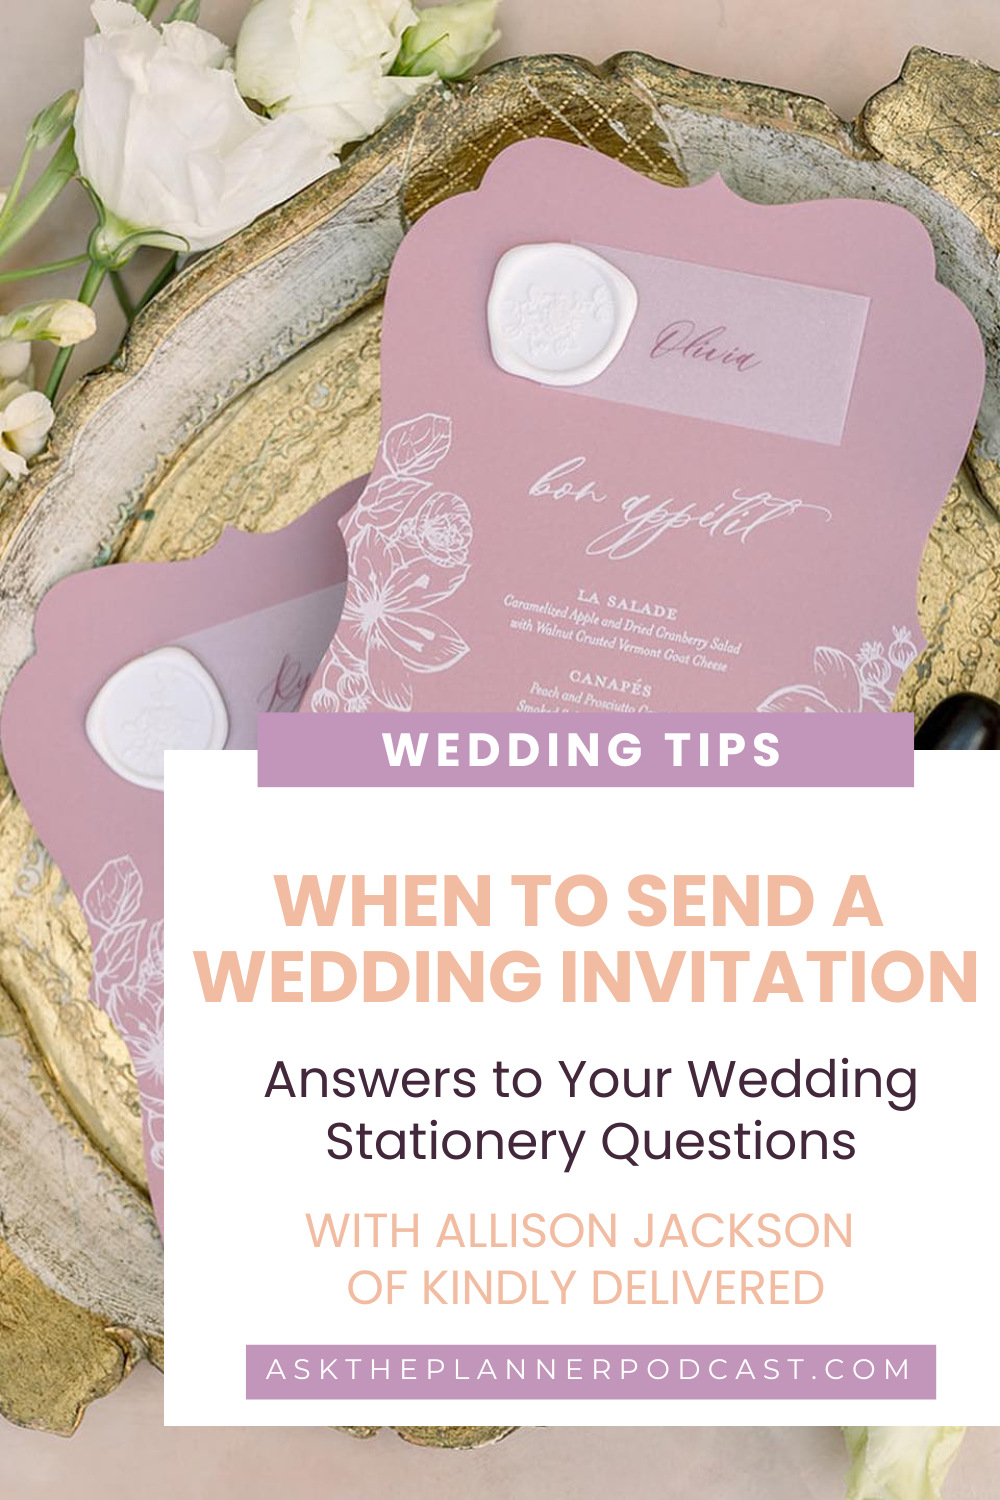 When to send a weddining invatation | Verve Event Co.